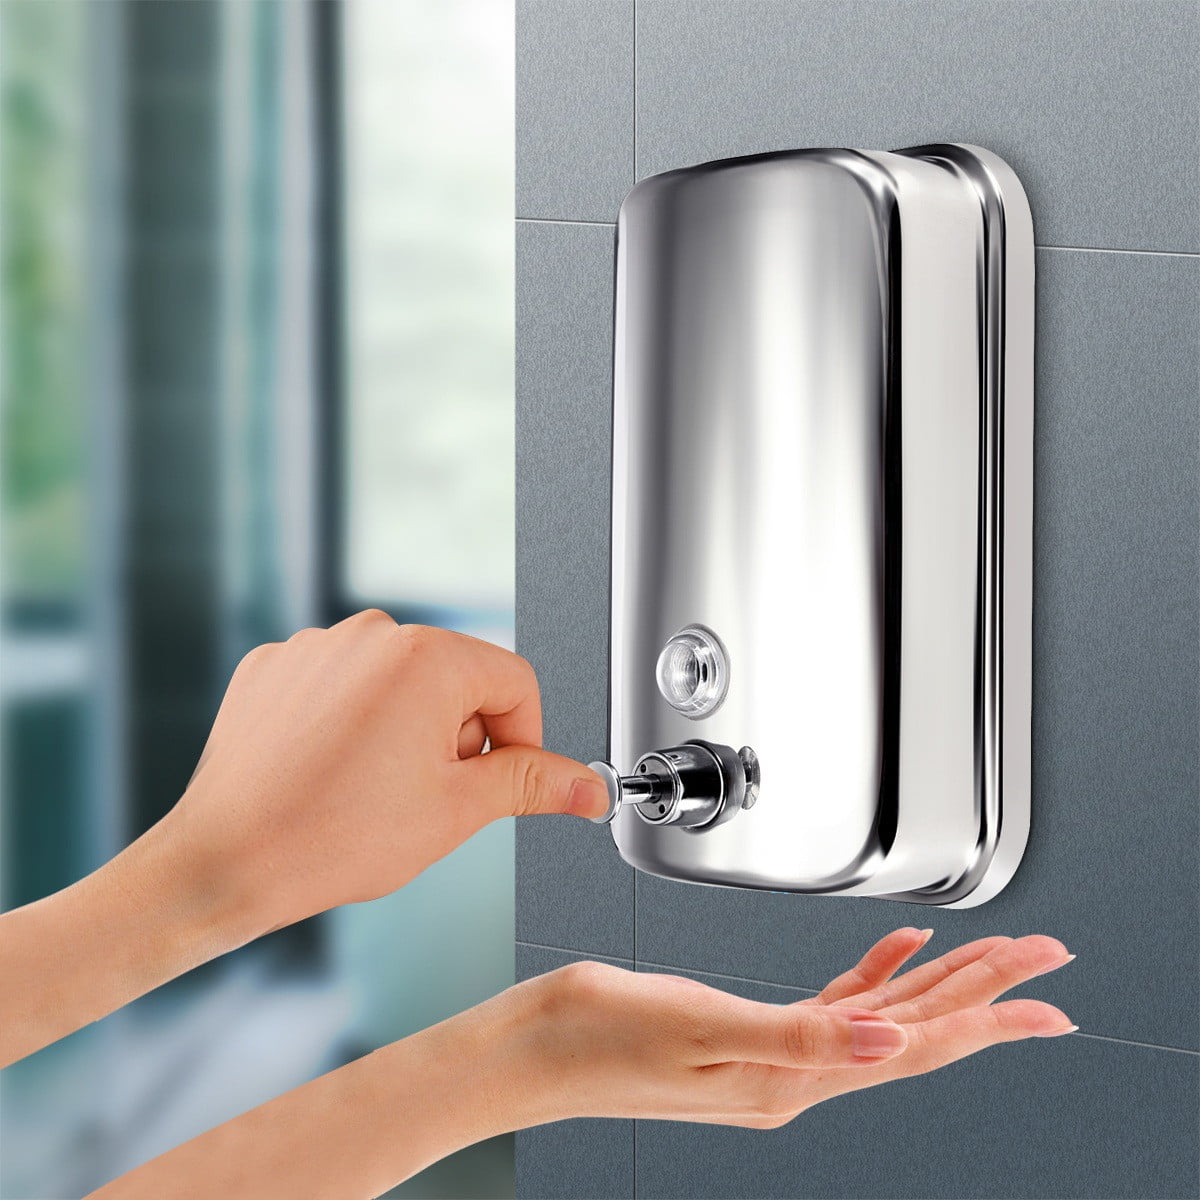 SOAP DISPENSER STAINLES STEEL 800ML WALL MOUNTED SHAMPOO DURABLE PUMP ACTION 